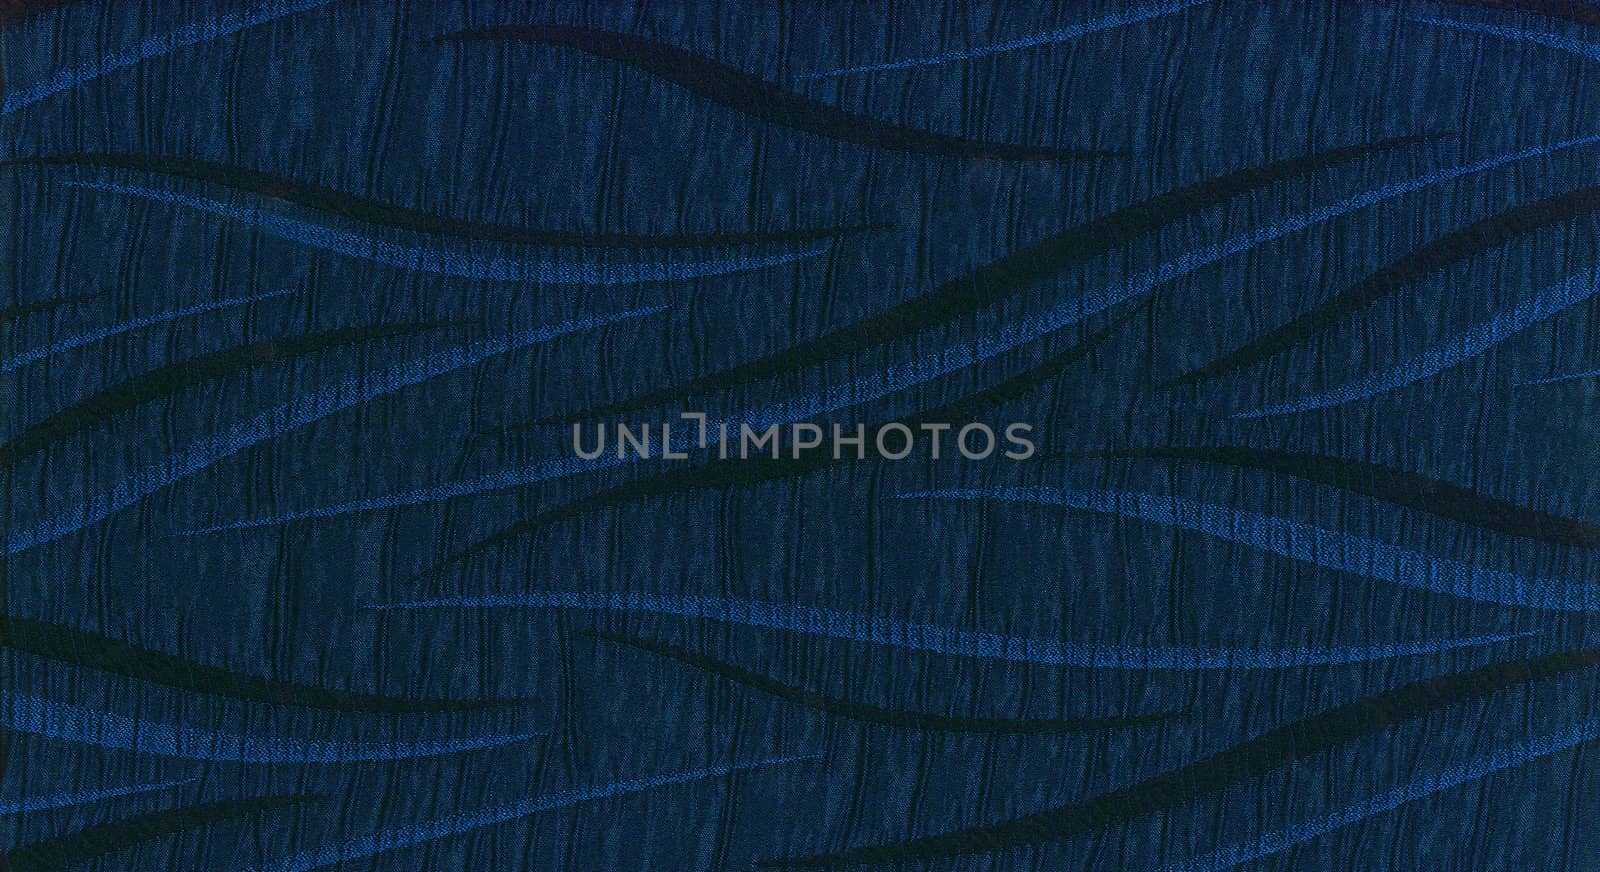 Blue Fabric Texture (High.res.scan)